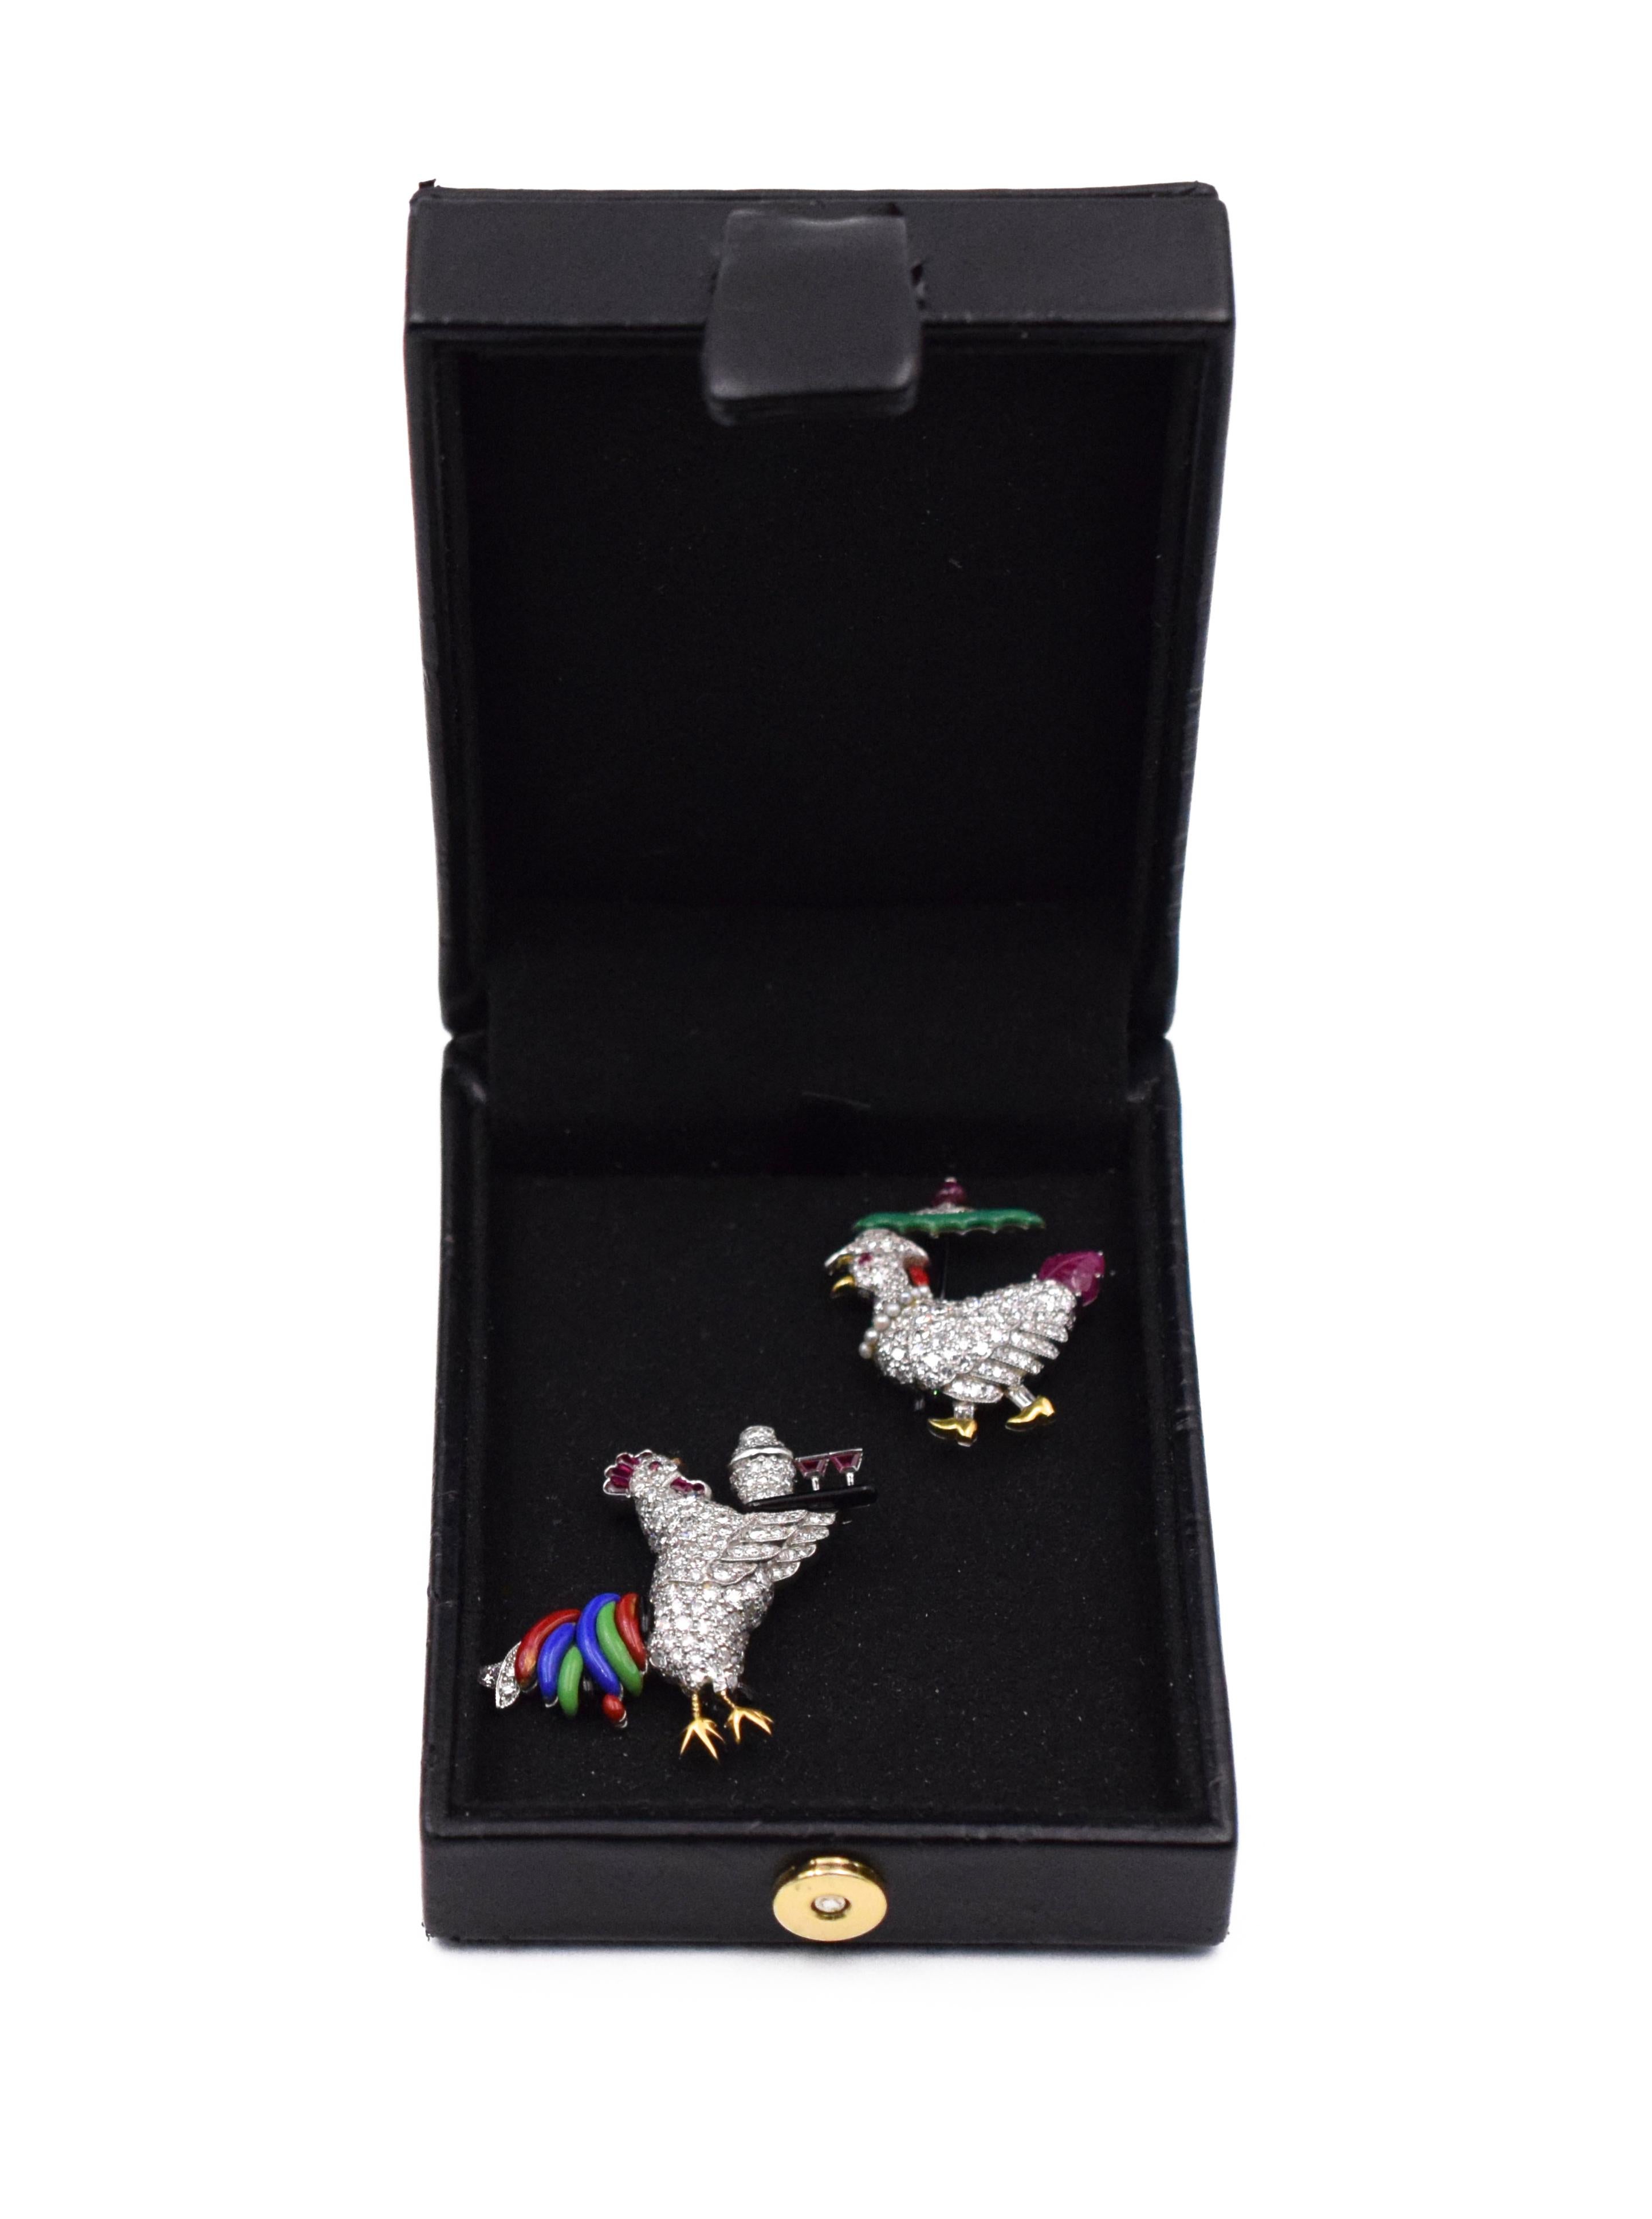 Ruby and Enamel Rooster Pin, Raymond Yard The rooster fashioned as a stylized cocktail waiter pavé-set with single- cut diamonds, holding a black enamel tray with shaker and martini glasses, signed Yard. Measurements: 1 1/2 inches and 1 1/2